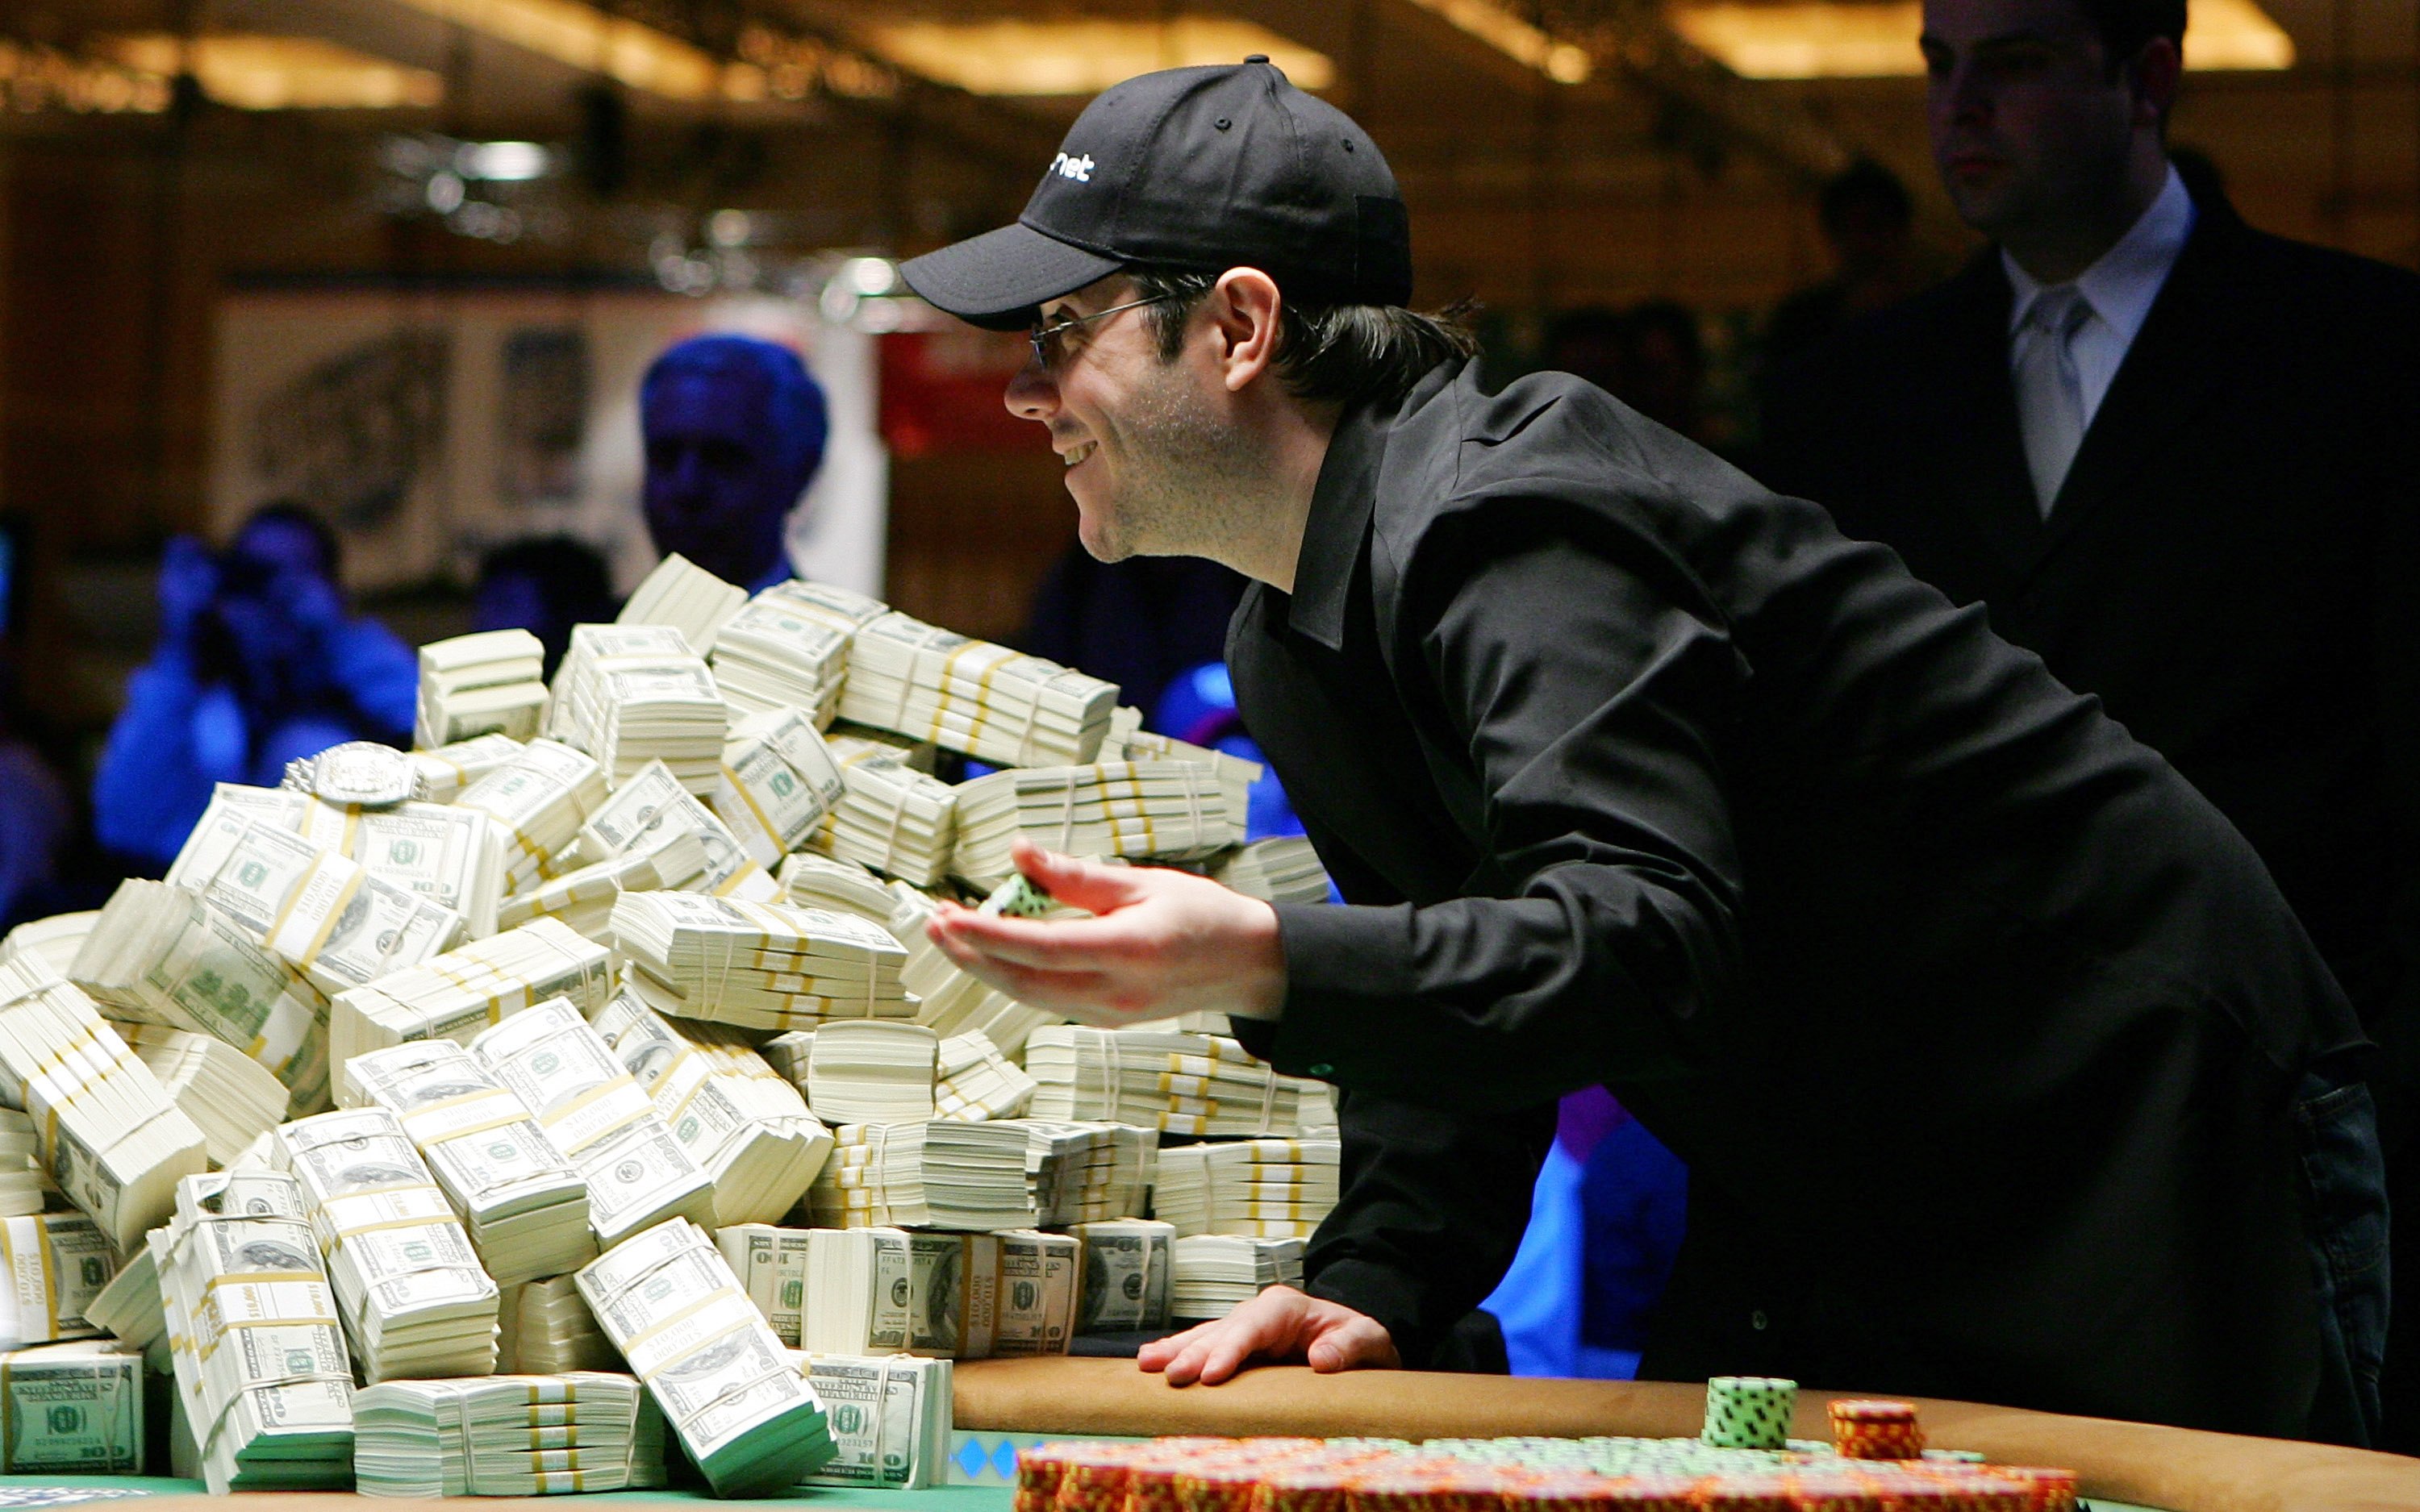 Jamie Gold in his element during the 2006 World Series of Poker Main Event, goading Paul Wasicka into a call during the heads-up battle for $12 million. (Photo: GettyImages)